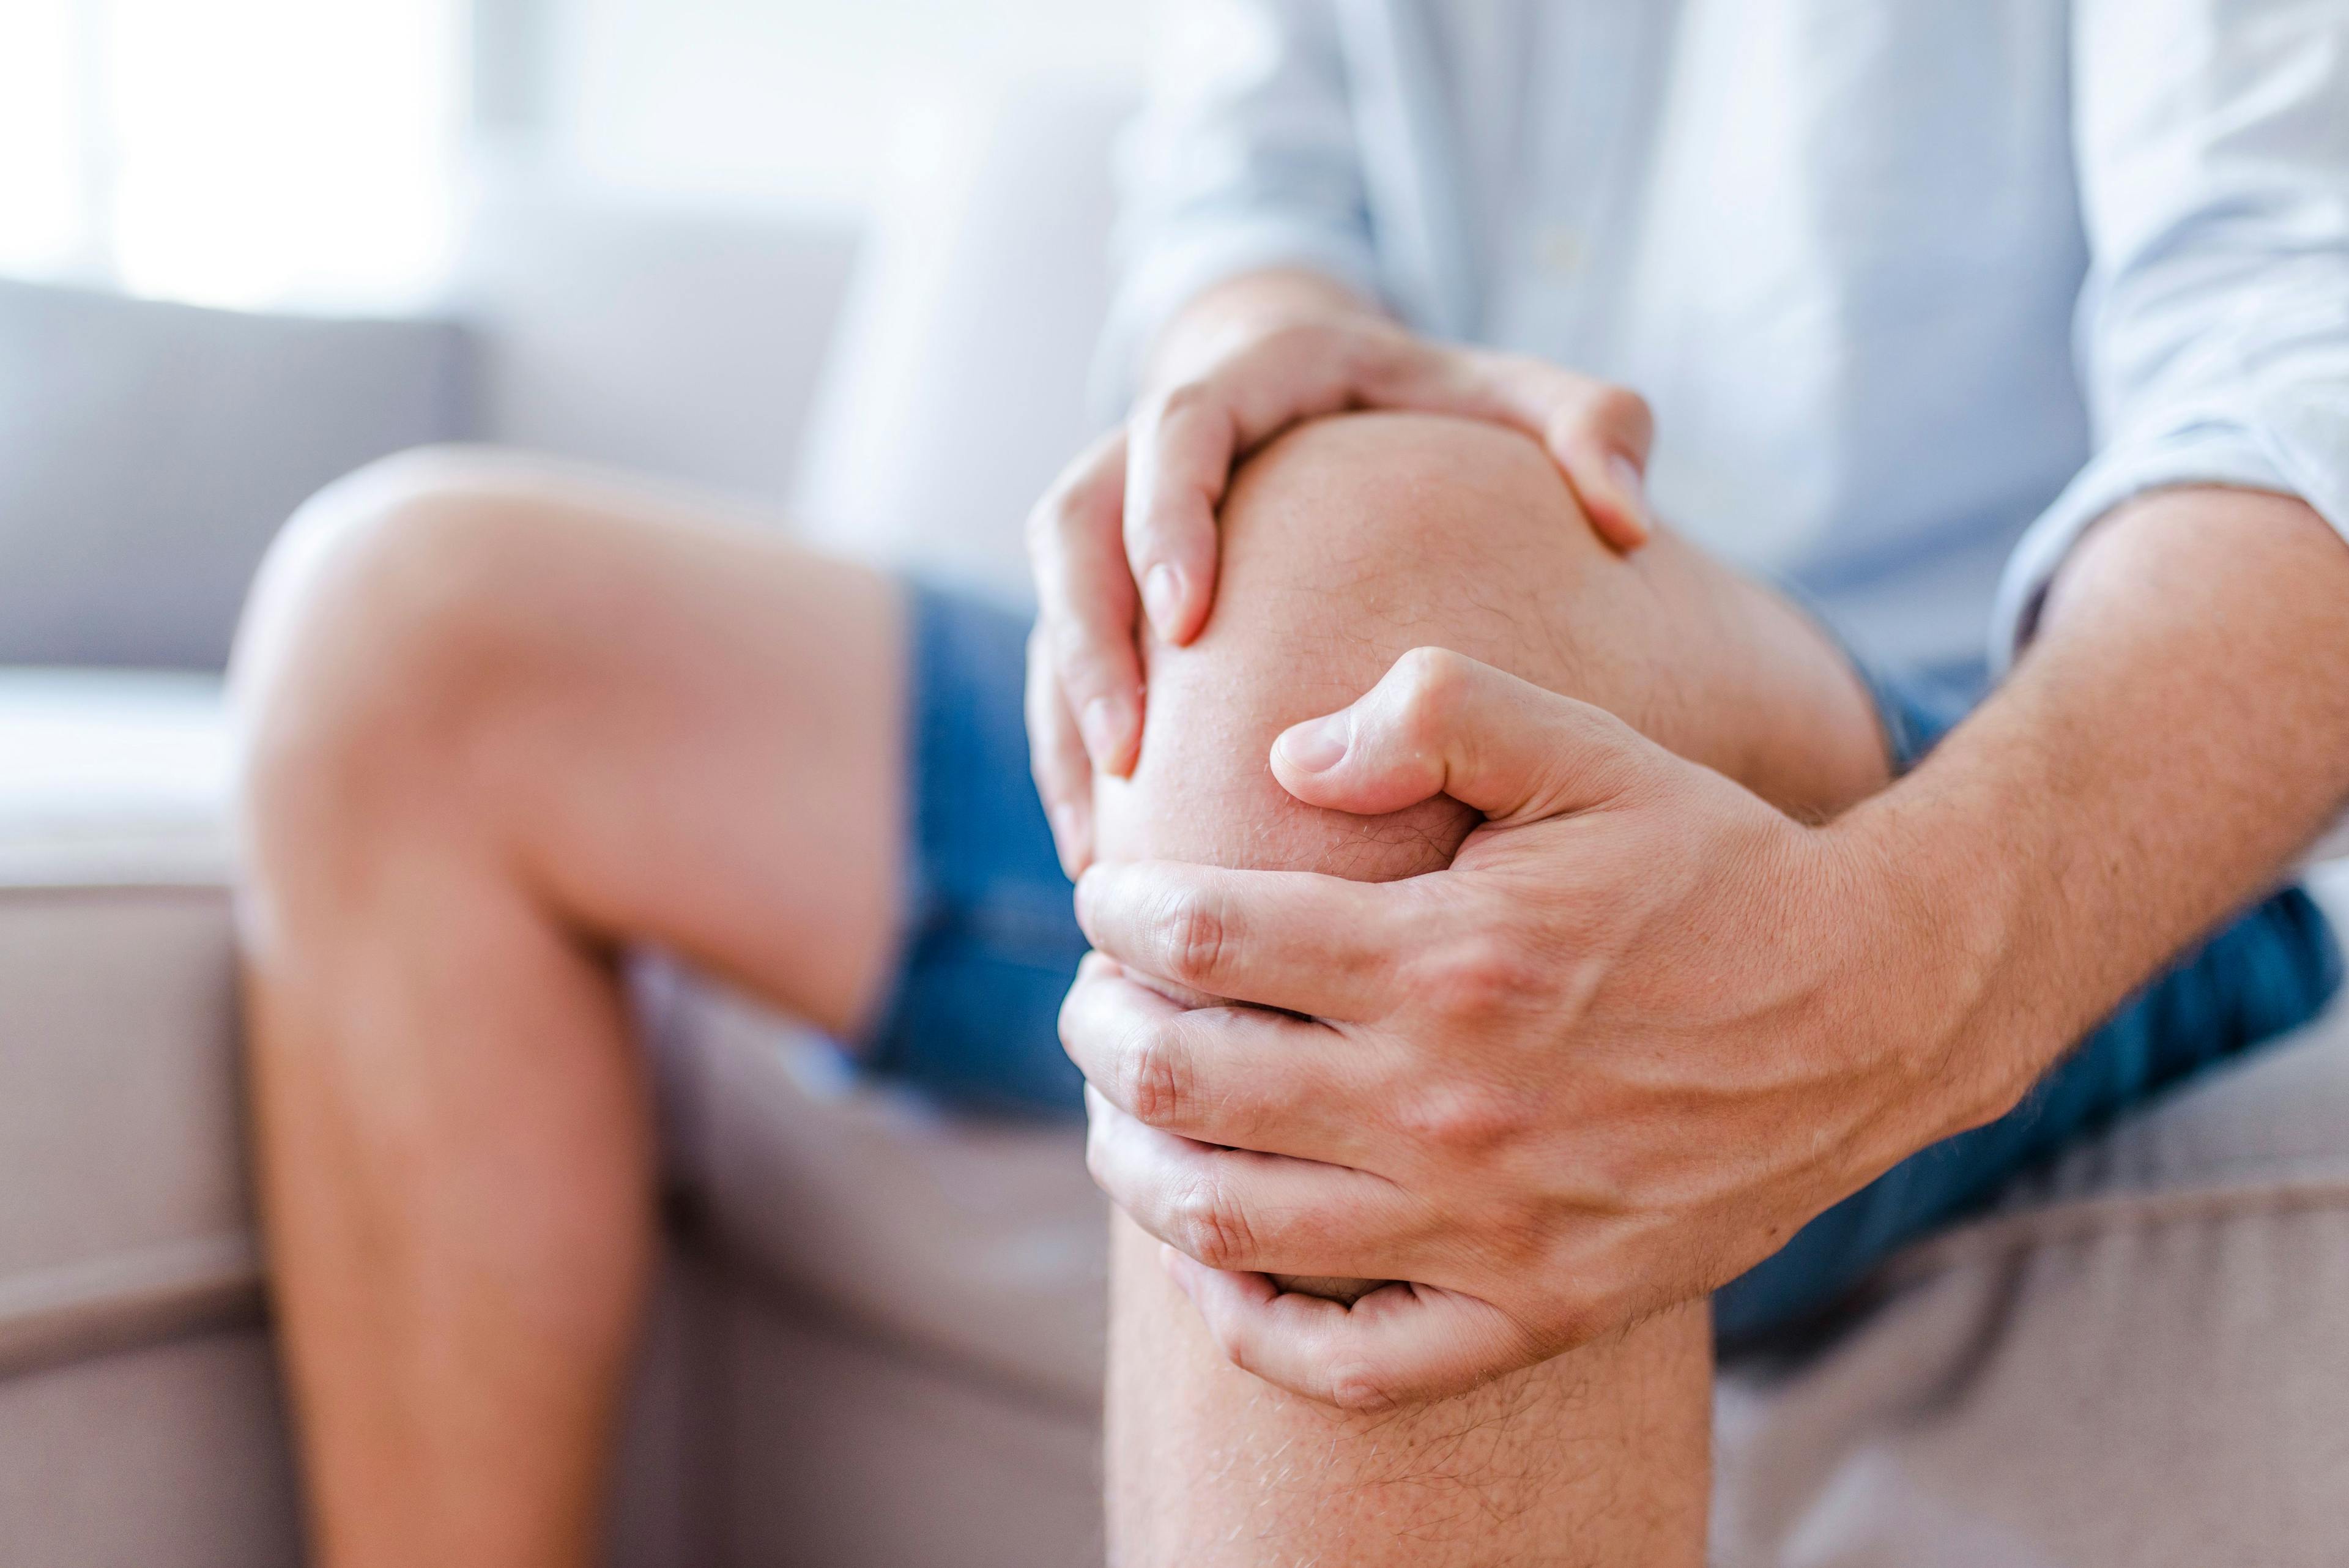 CRTAC1 Biomarker Linked to Increased Osteoarthritis Risk, Joint Replacements 